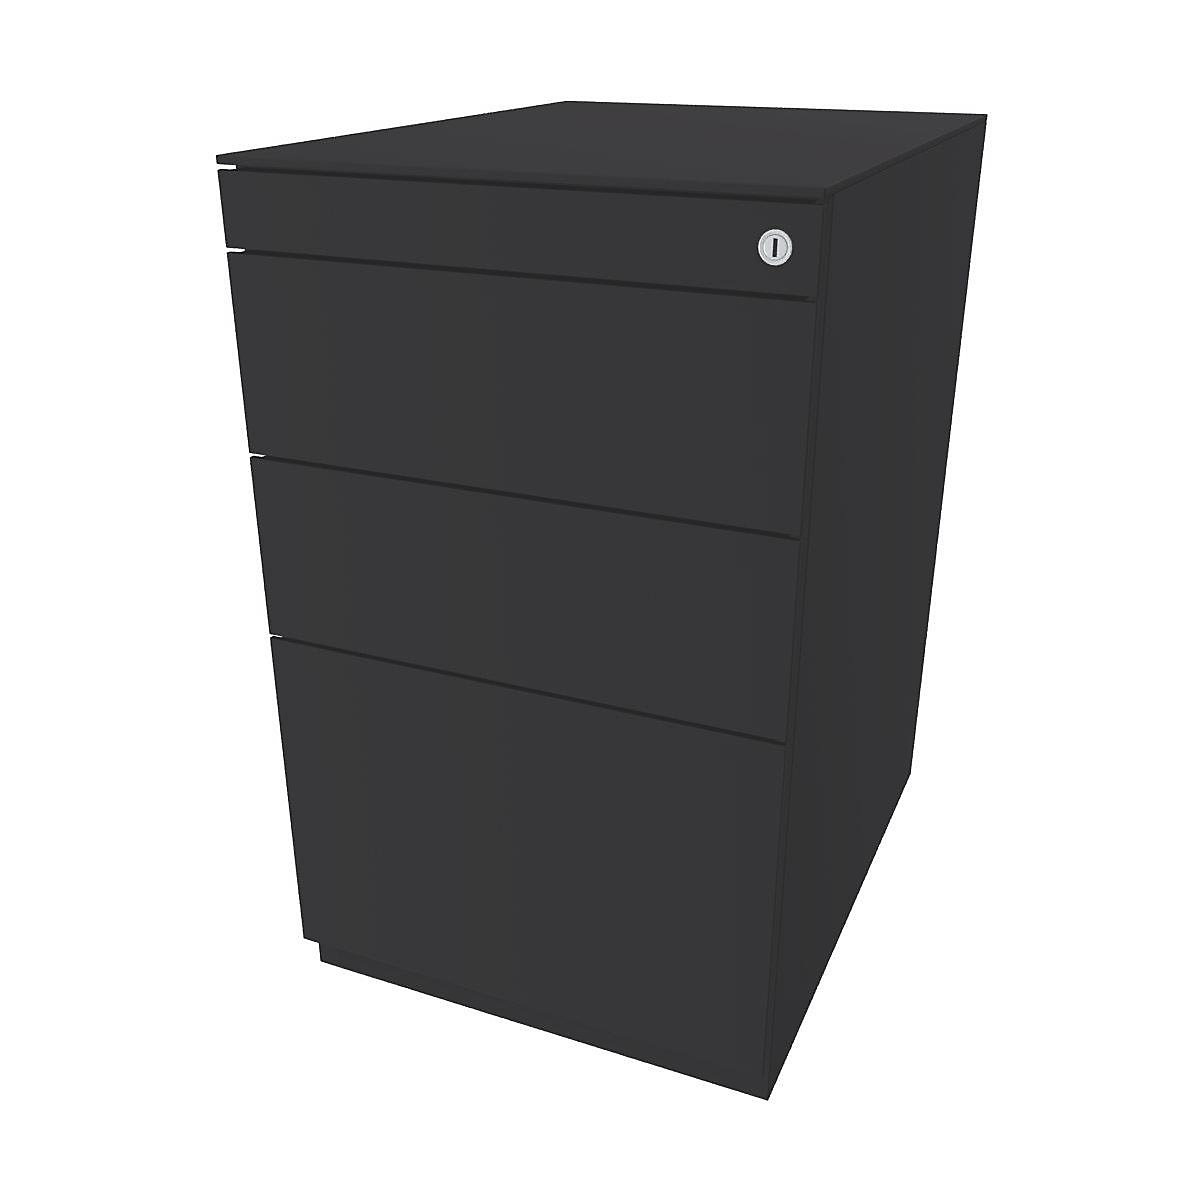 Note™ fixed pedestal, with 2 universal drawers, 1 suspension file drawer – BISLEY, with top, depth 565 mm, charcoal-3